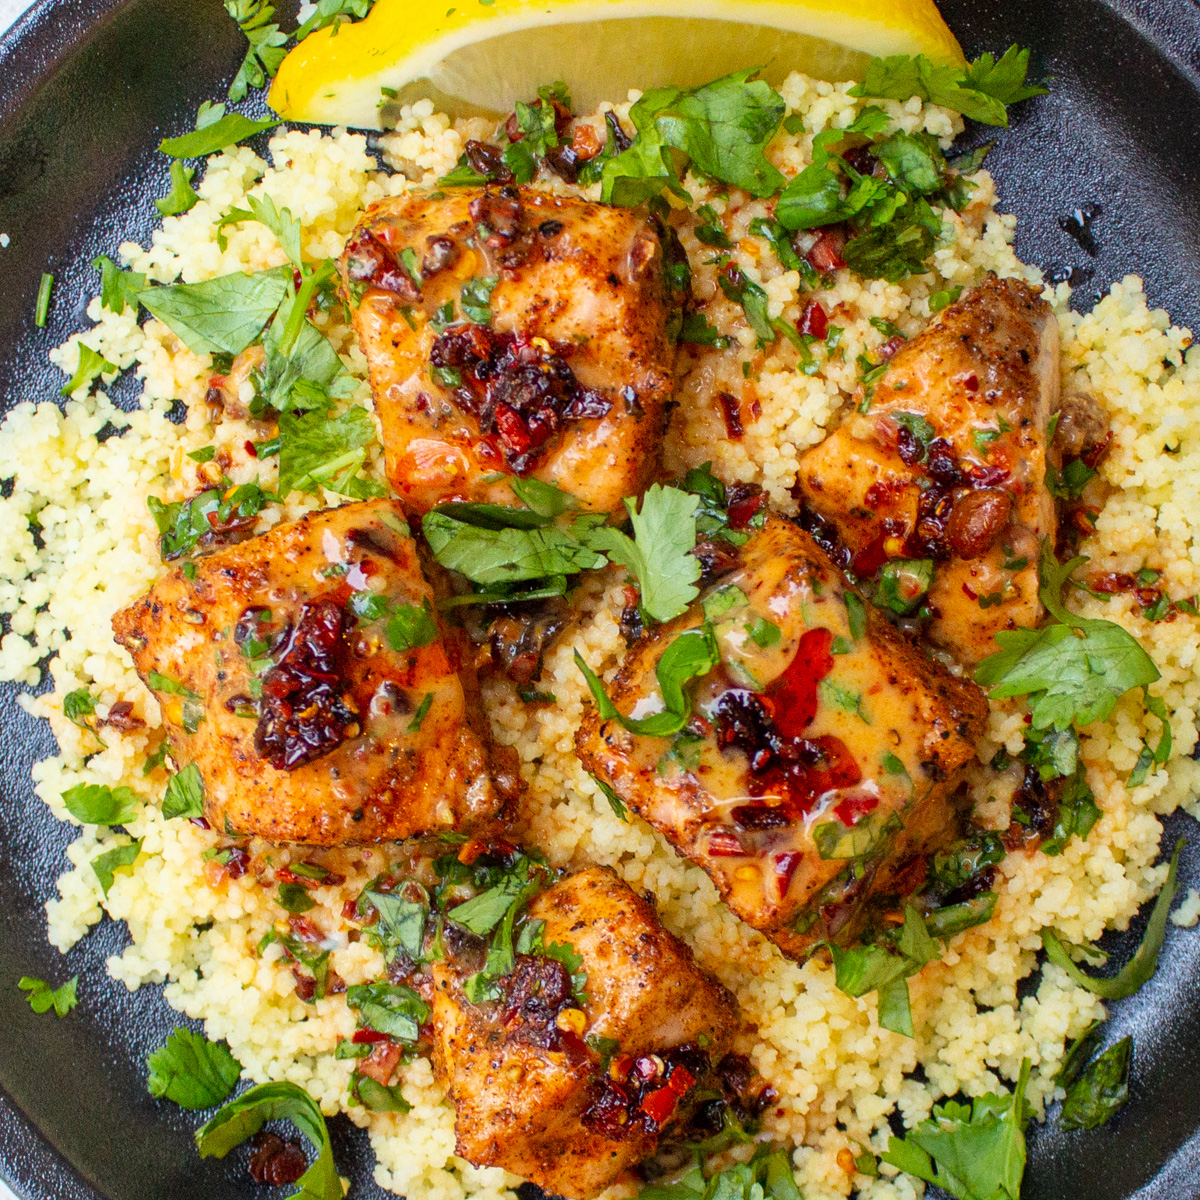 5 salmon bites with chili crisp sauce over couscous on plate.